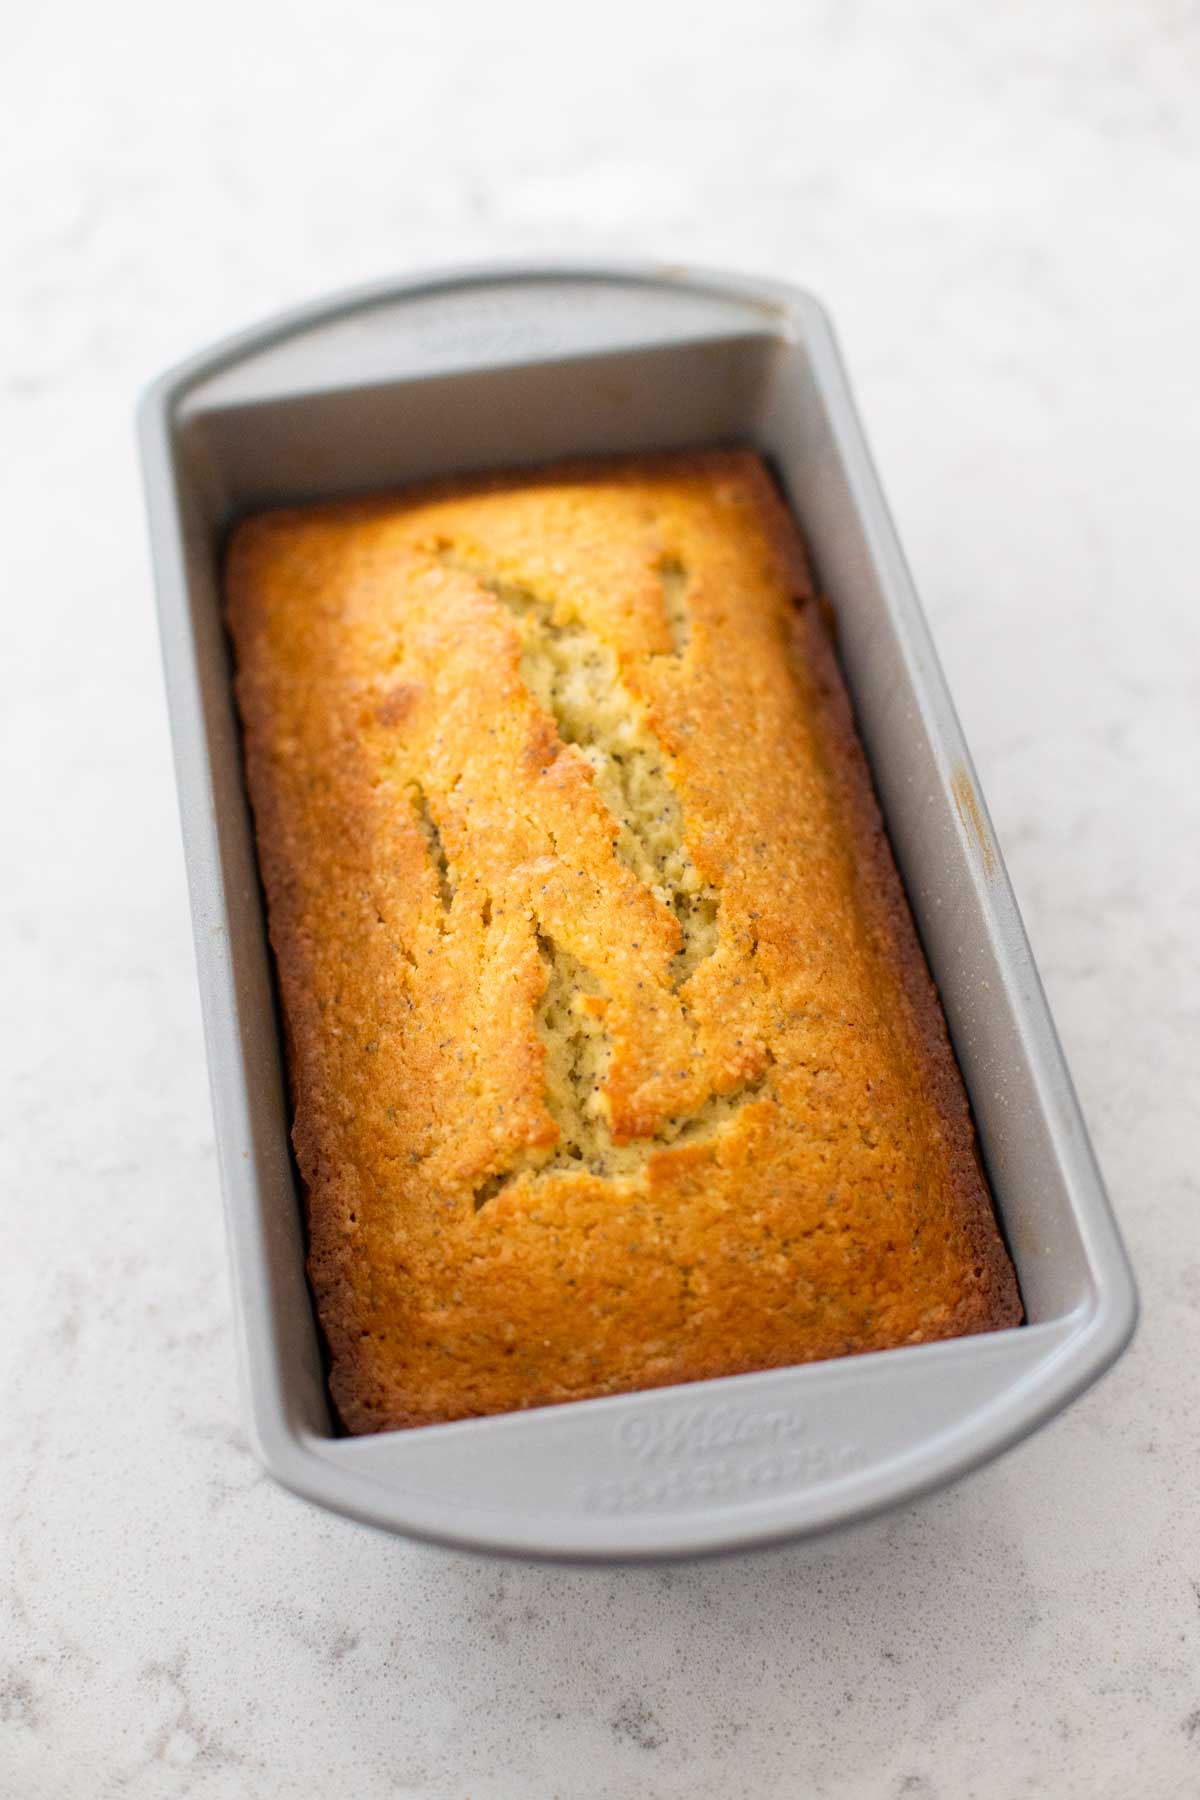 The baked almond poppy seed bread in the bread pan shows how the crust should look when it is done.